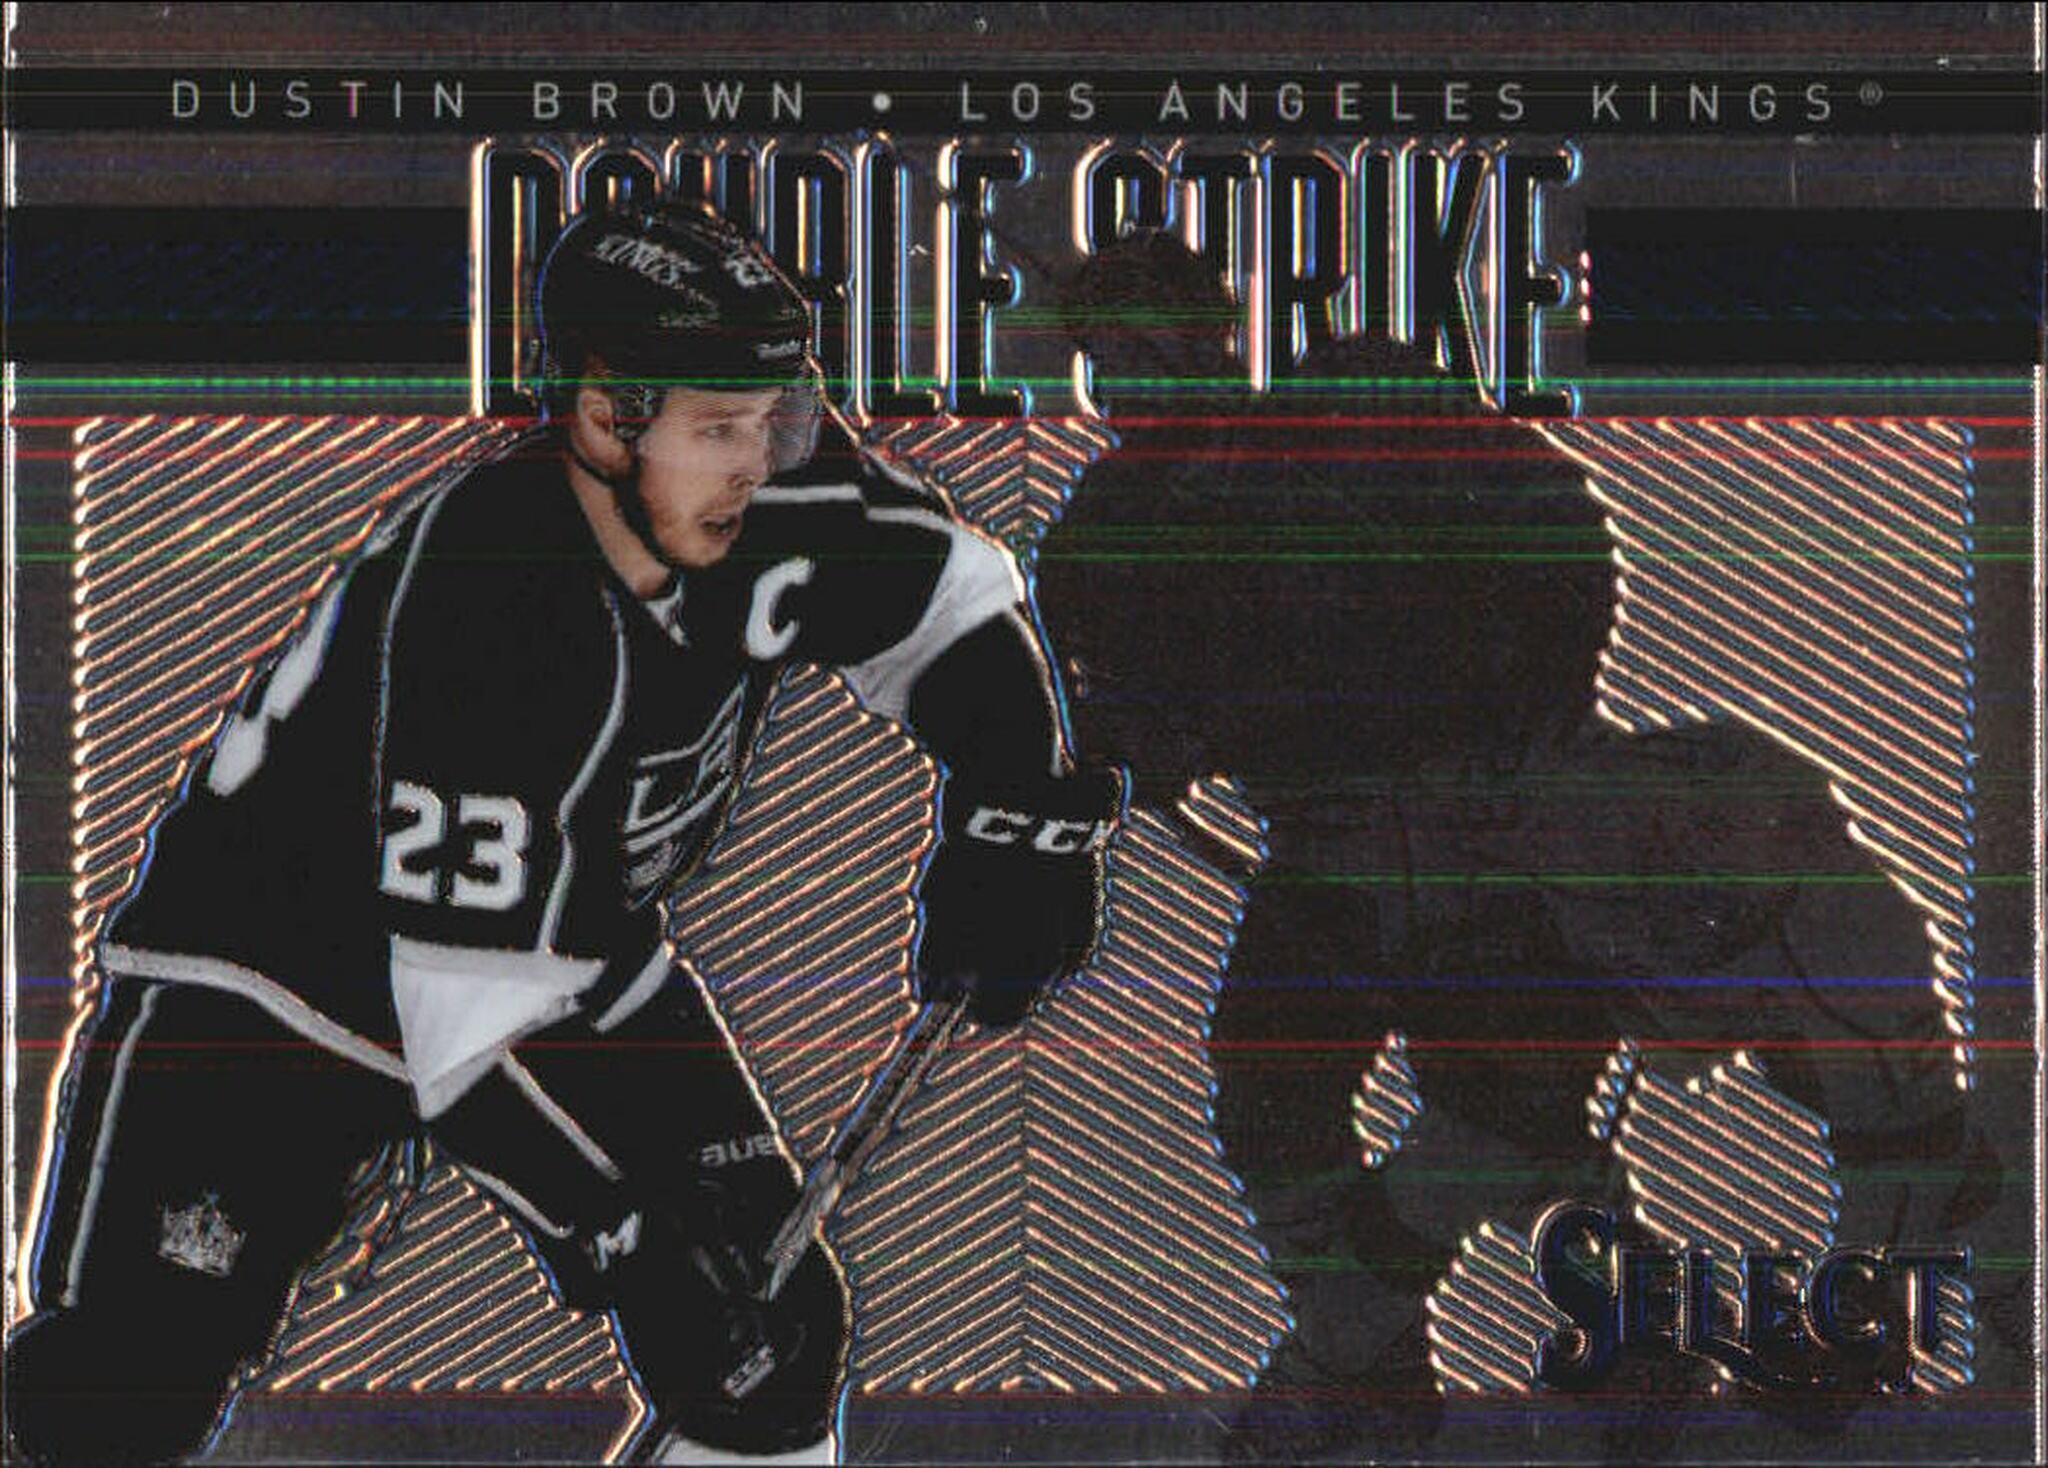 2013-14 Select Double Strike #DS3 Dustin Brown (30-X12-NHLKINGS)